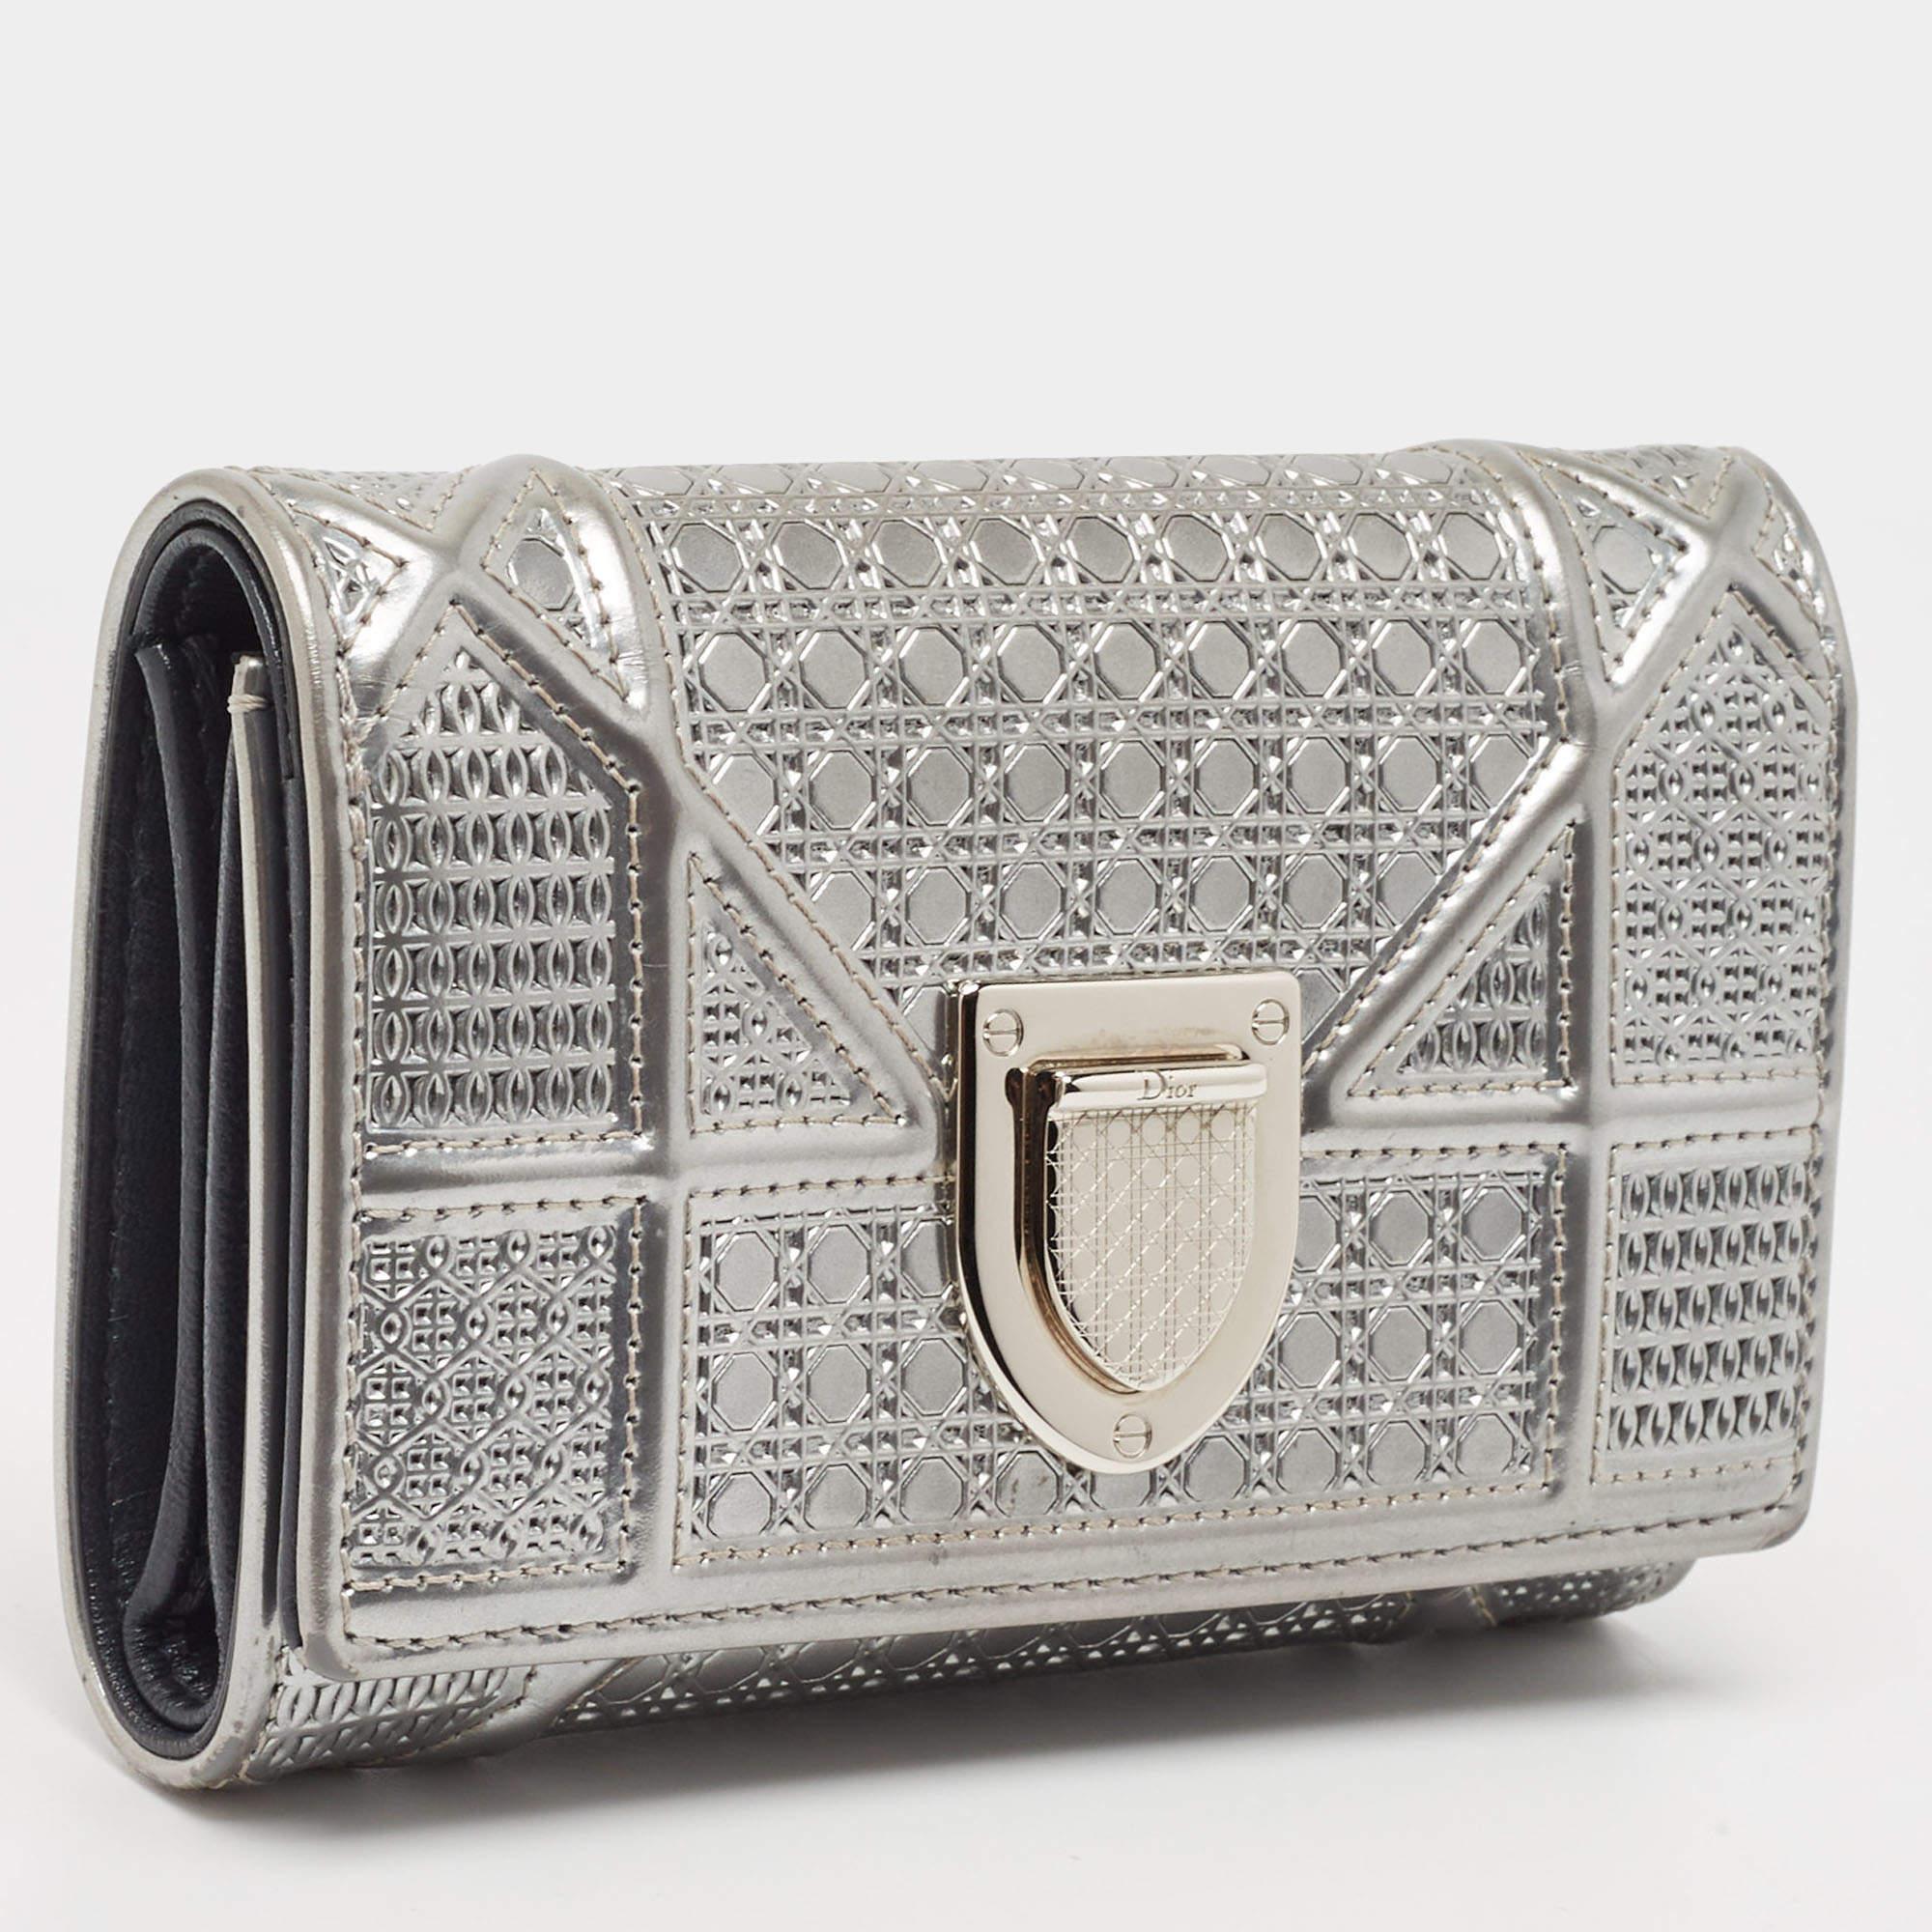 Elevate your everyday elegance with this Dior wallet. Meticulously crafted from premium materials, it seamlessly blends style, functionality, and sophistication, making it a great pick.

